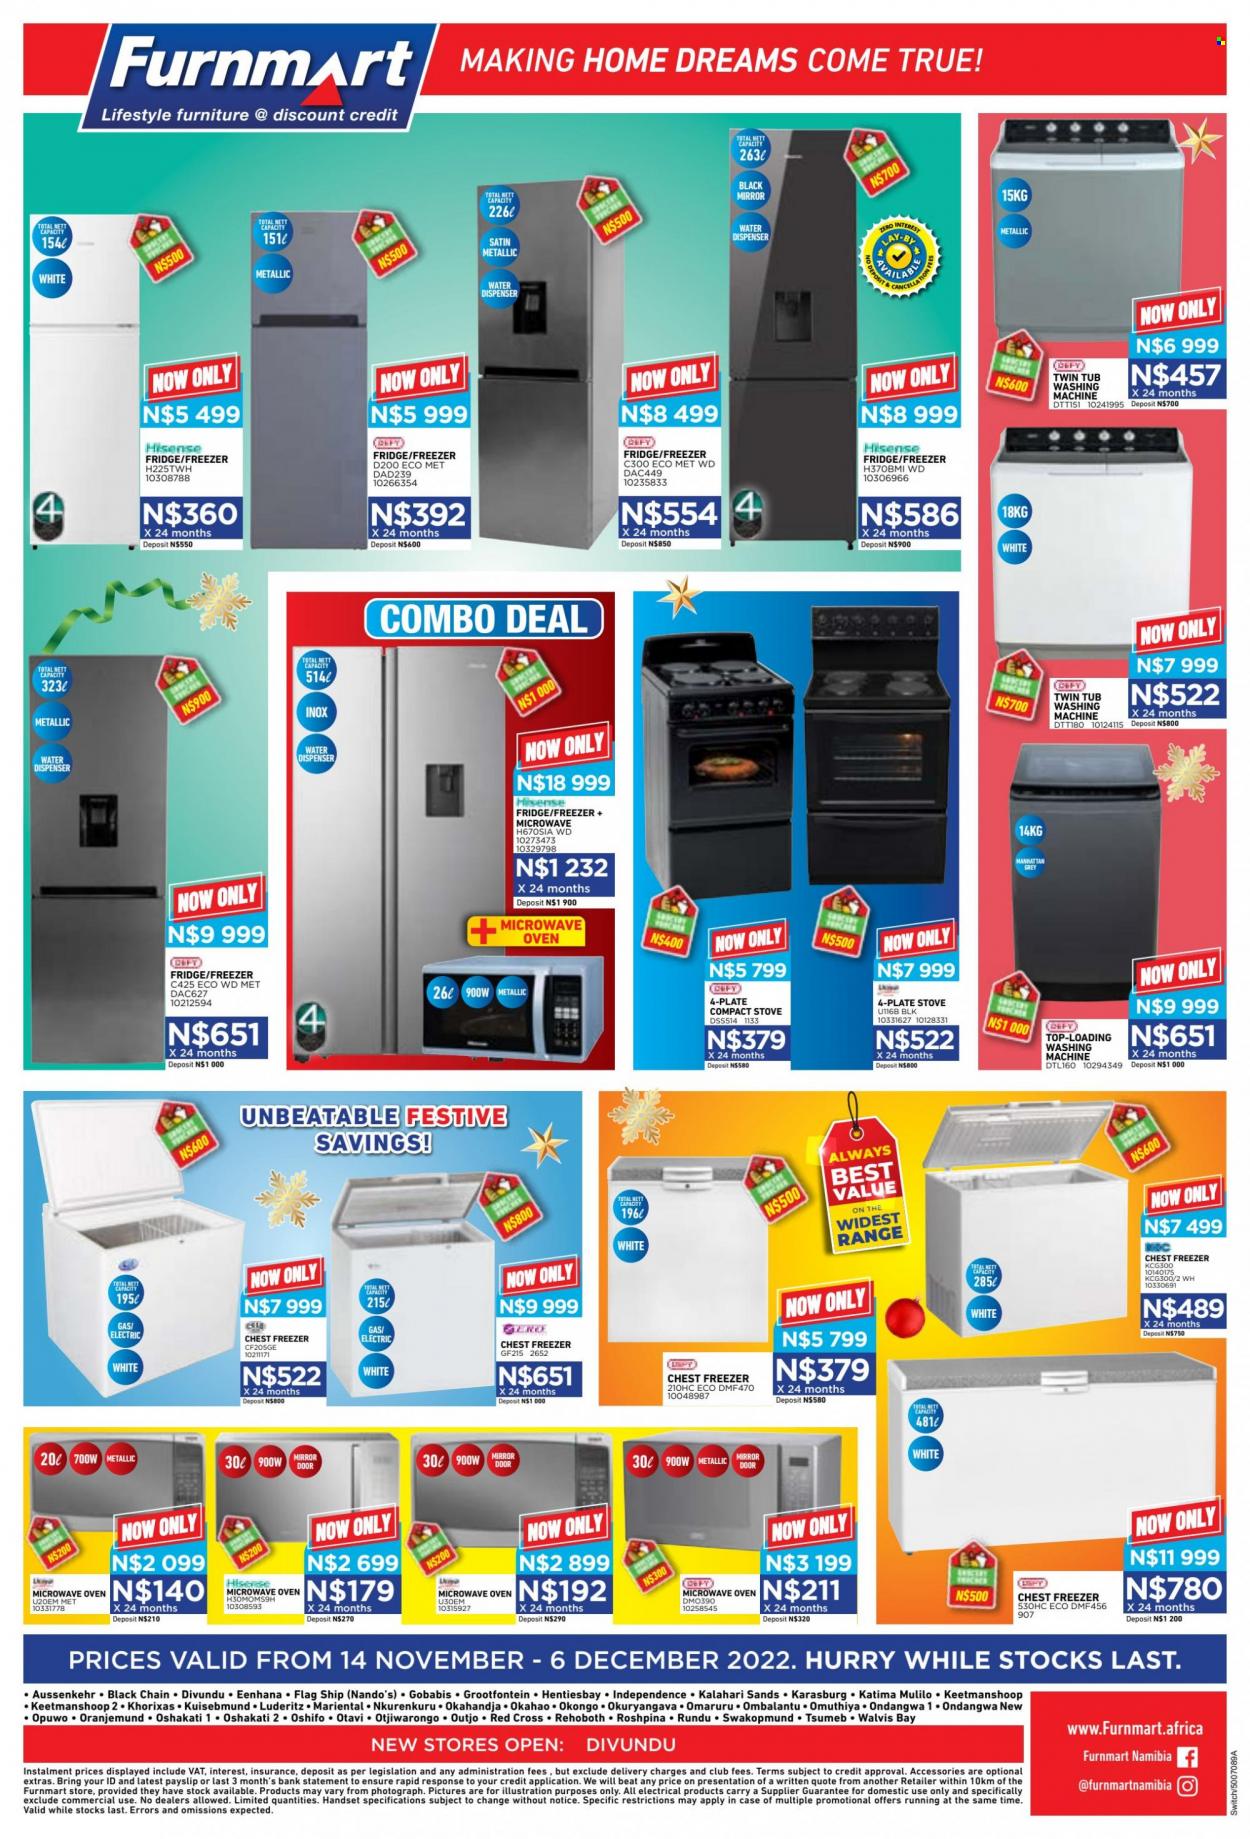 Furnmart catalogue  - 14/11/2022 - 06/12/2022 - Sales products - mirror, WD, Hisense, freezer, chest freezer, refrigerator, fridge, oven, stove, microwave oven, washing machine, water dispenser. Page 8.